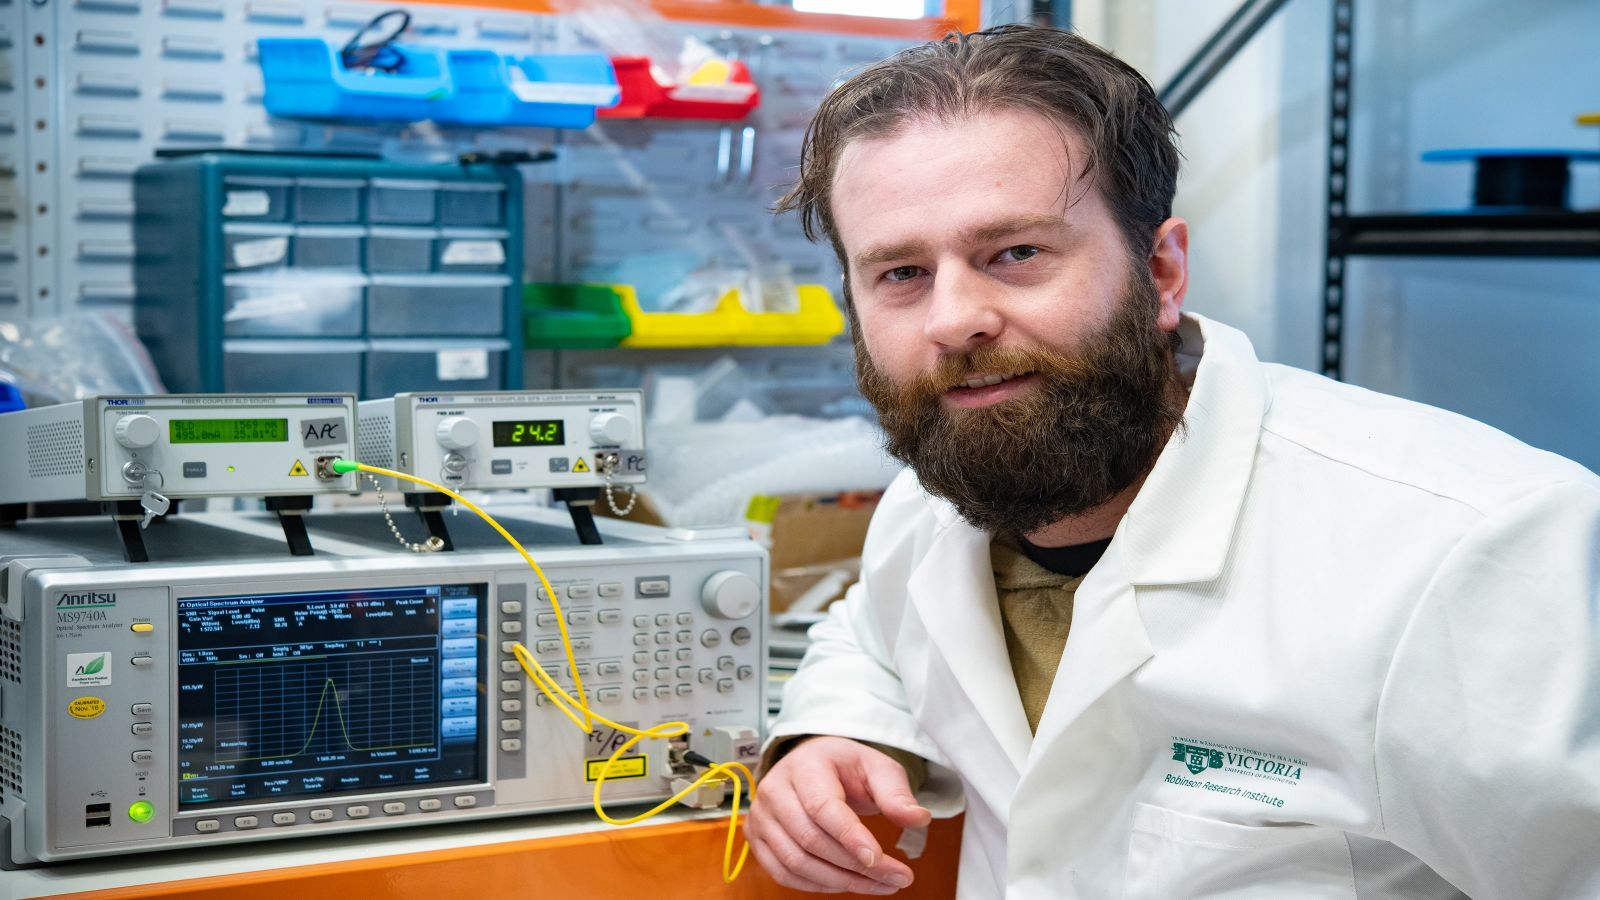 A male researcher sitting in front of lab equipment including an optical spectrum analyser.